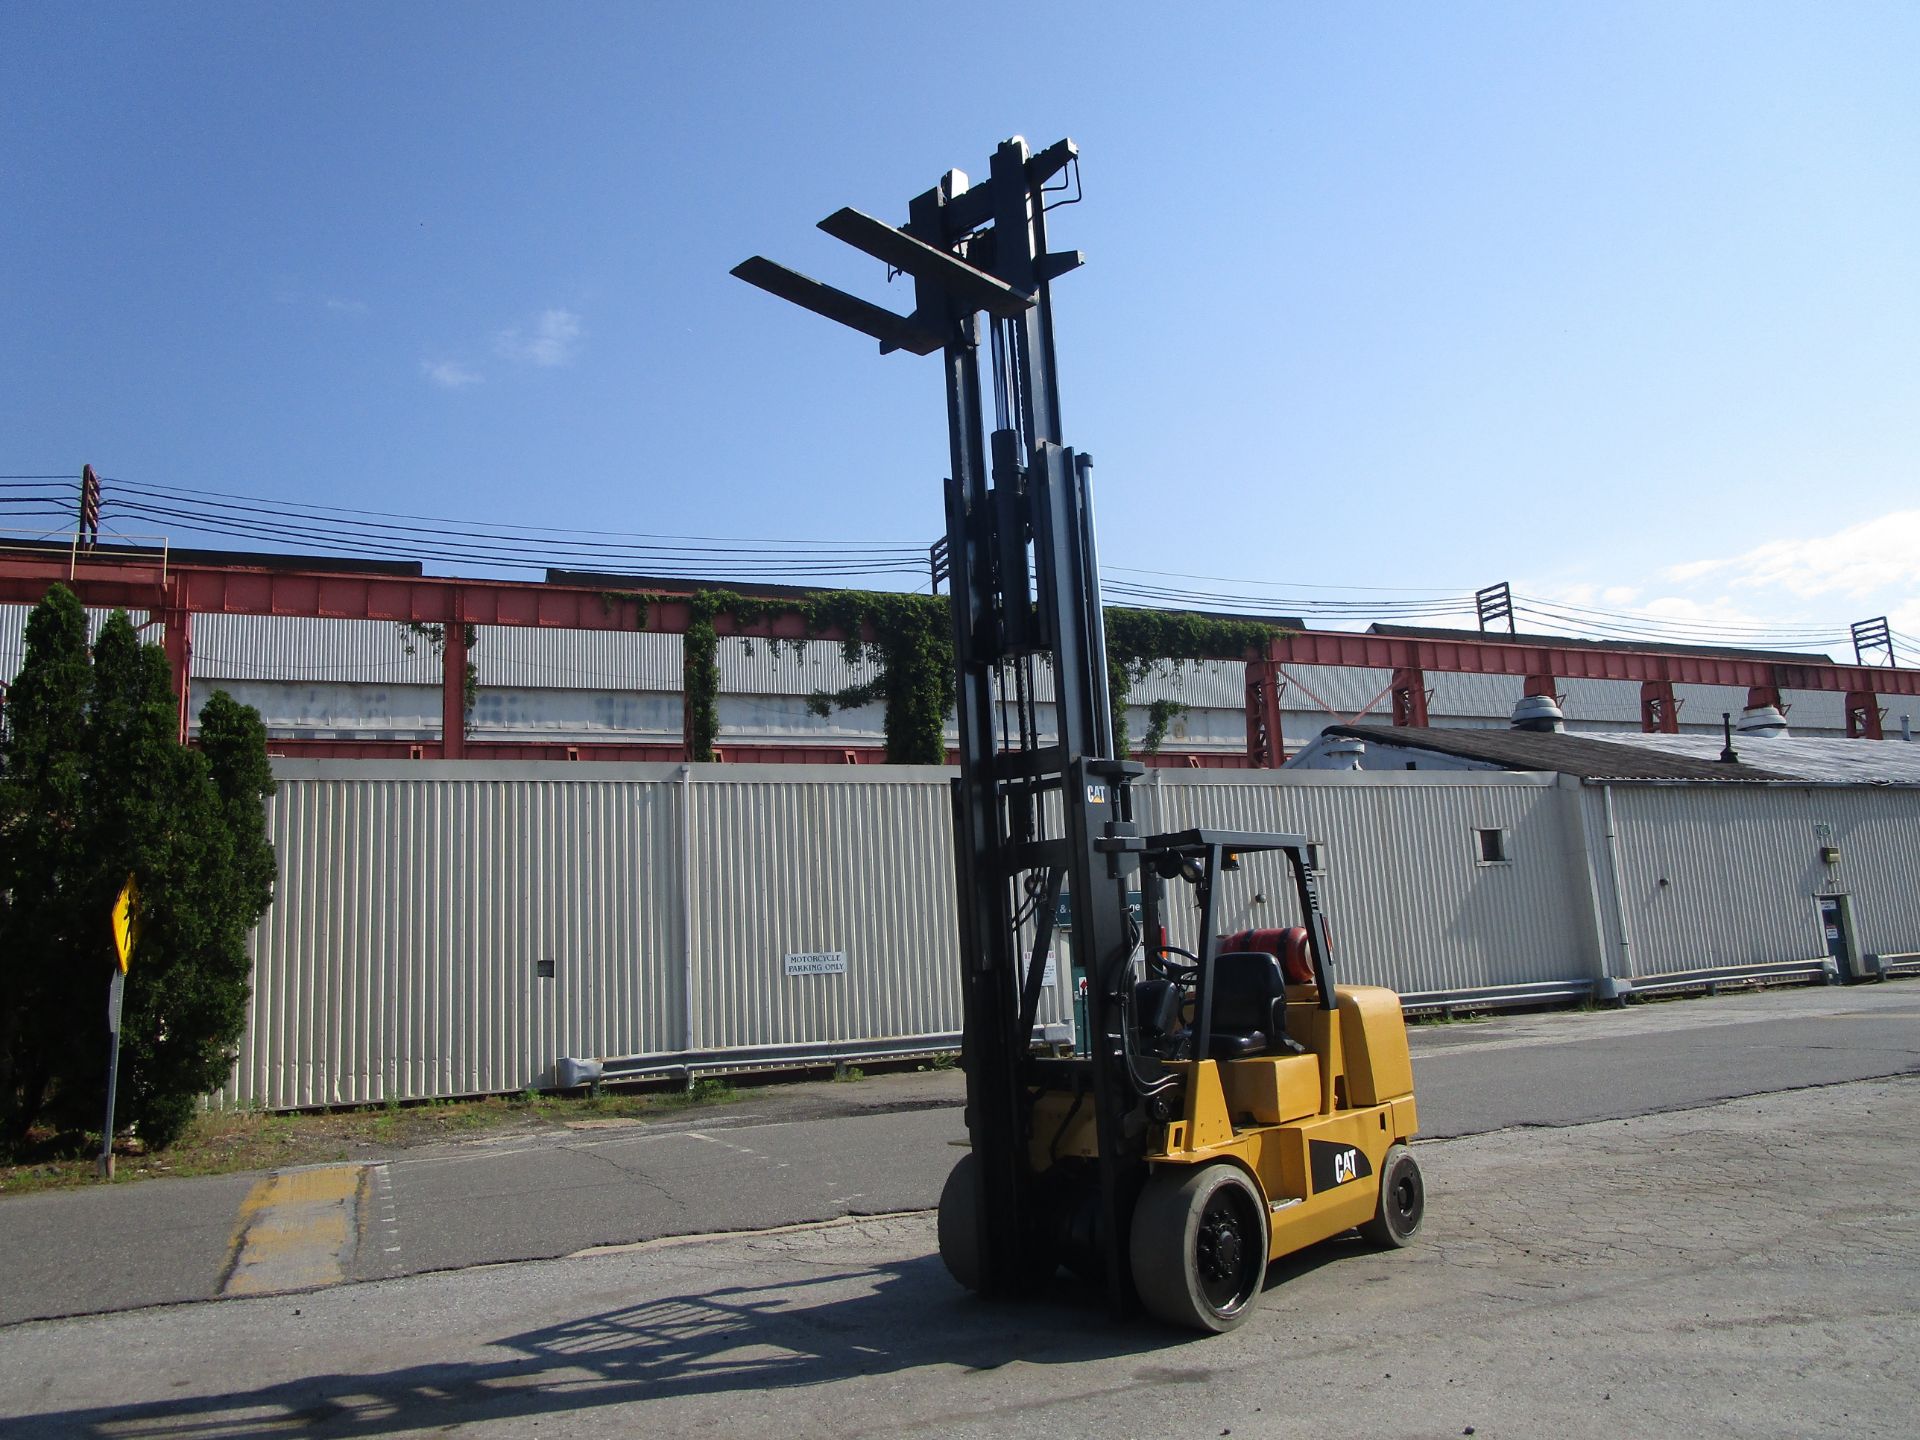 Caterpillar GC60K 13,000lb Forklift - Located in Lester, PA - Image 6 of 10